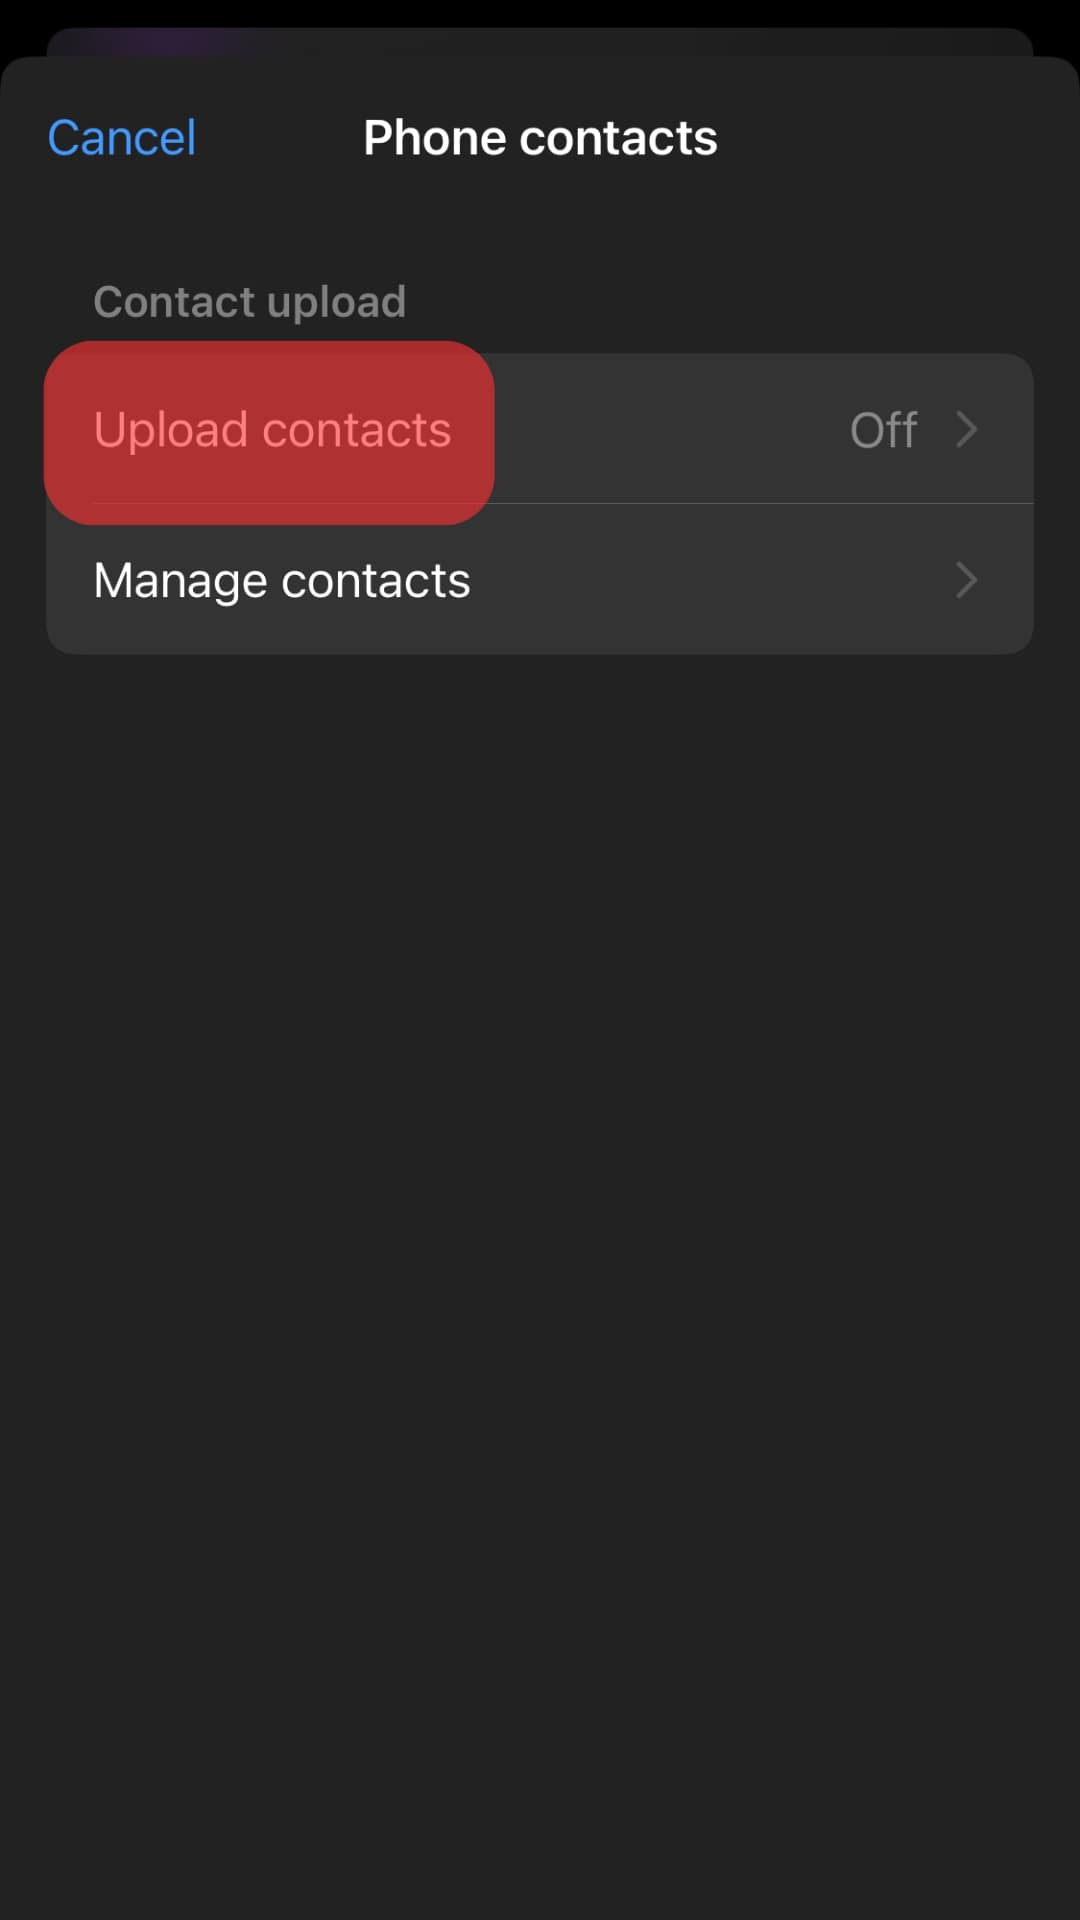 Tap The Turn Off Option In The Upload Contacts Section.